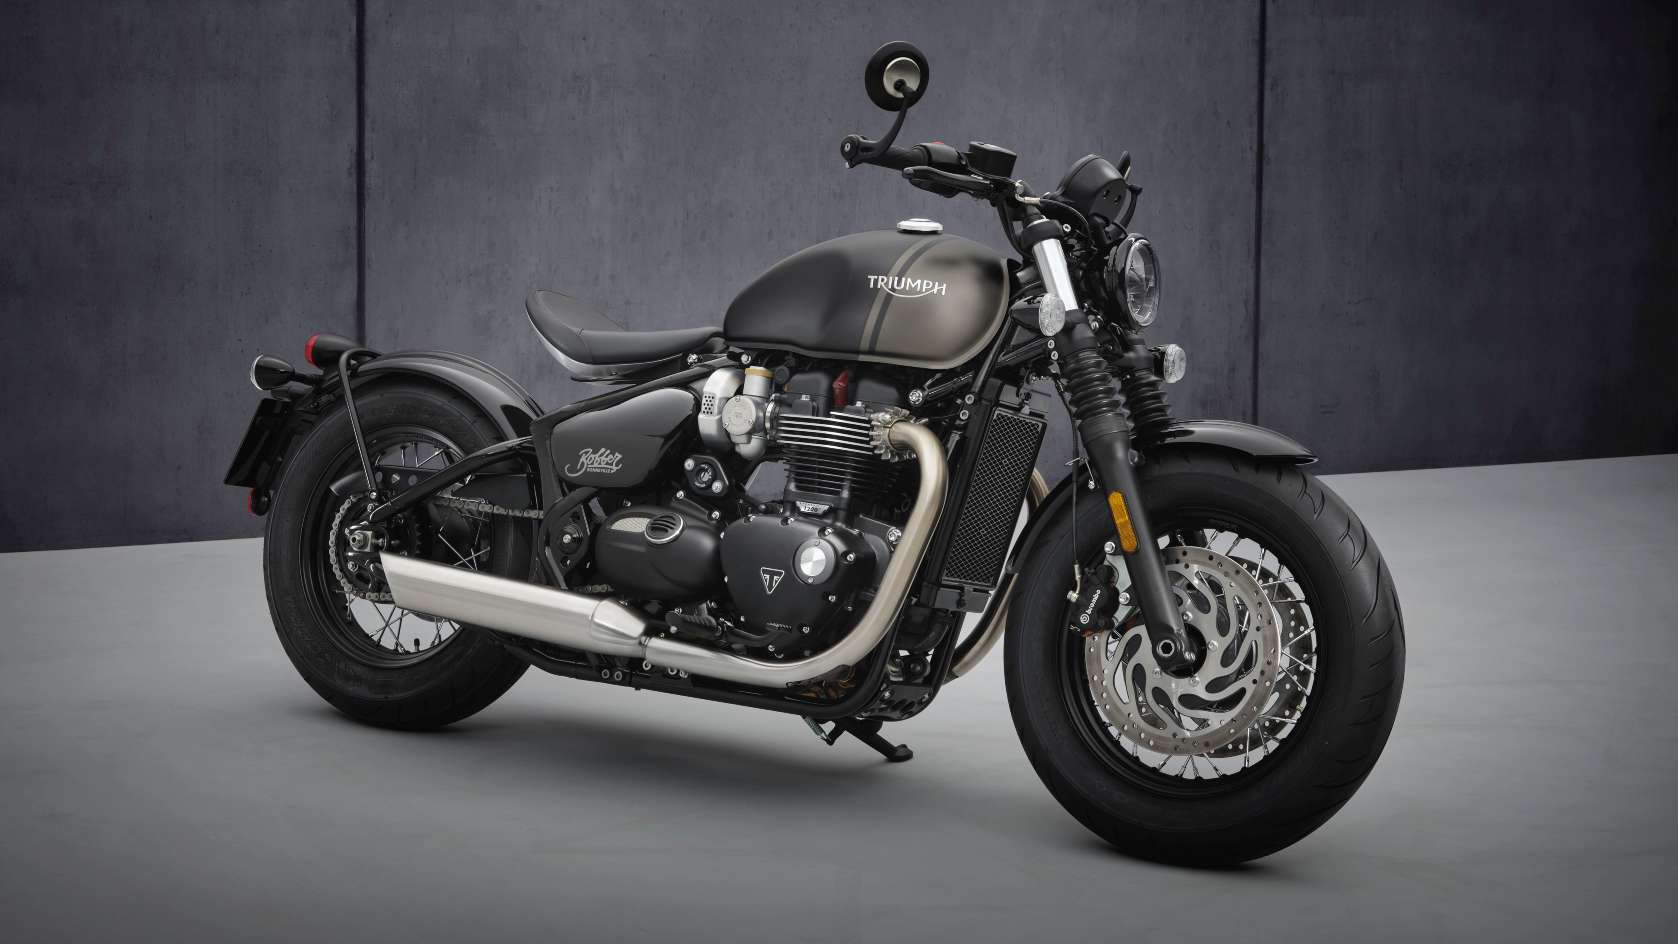 The 2021 Triumph Bonneville Bobber, with all its added features, costs Rs 1.4 lakh more than the previous Bobber. Image: Triumph Motorcycles